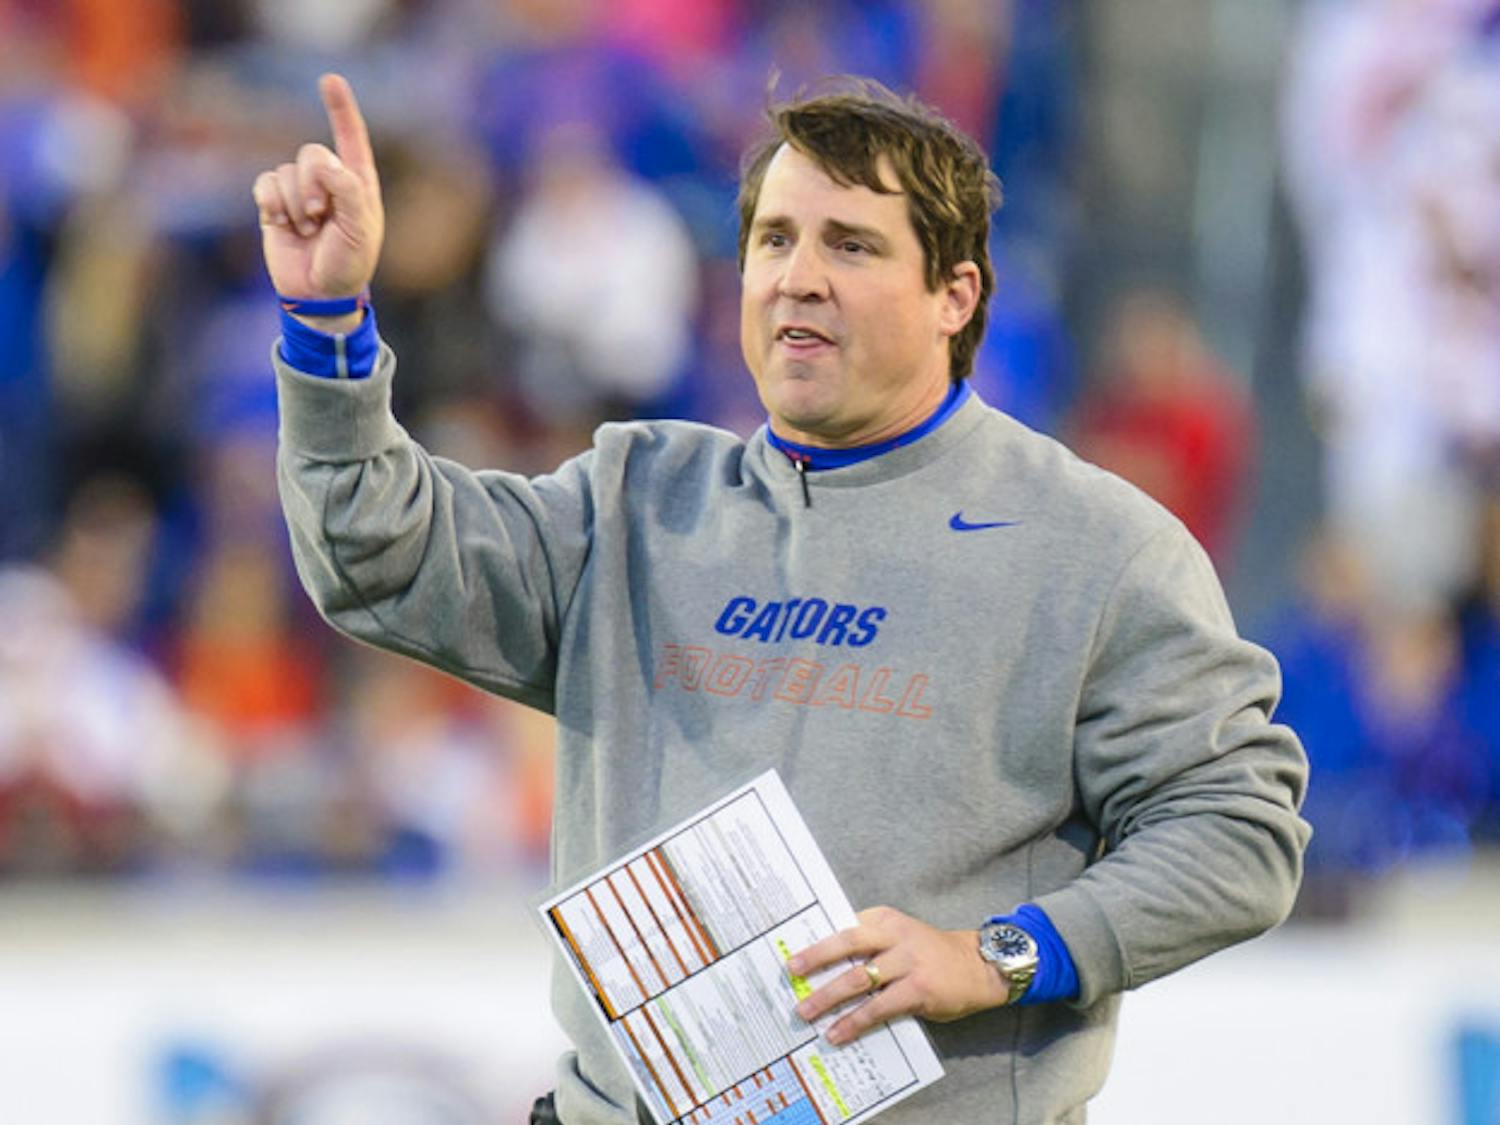 Will Muschamp signals during UF's 38-20 win against UGA on Nov. 1 at EverBank Field in Jacksonville.